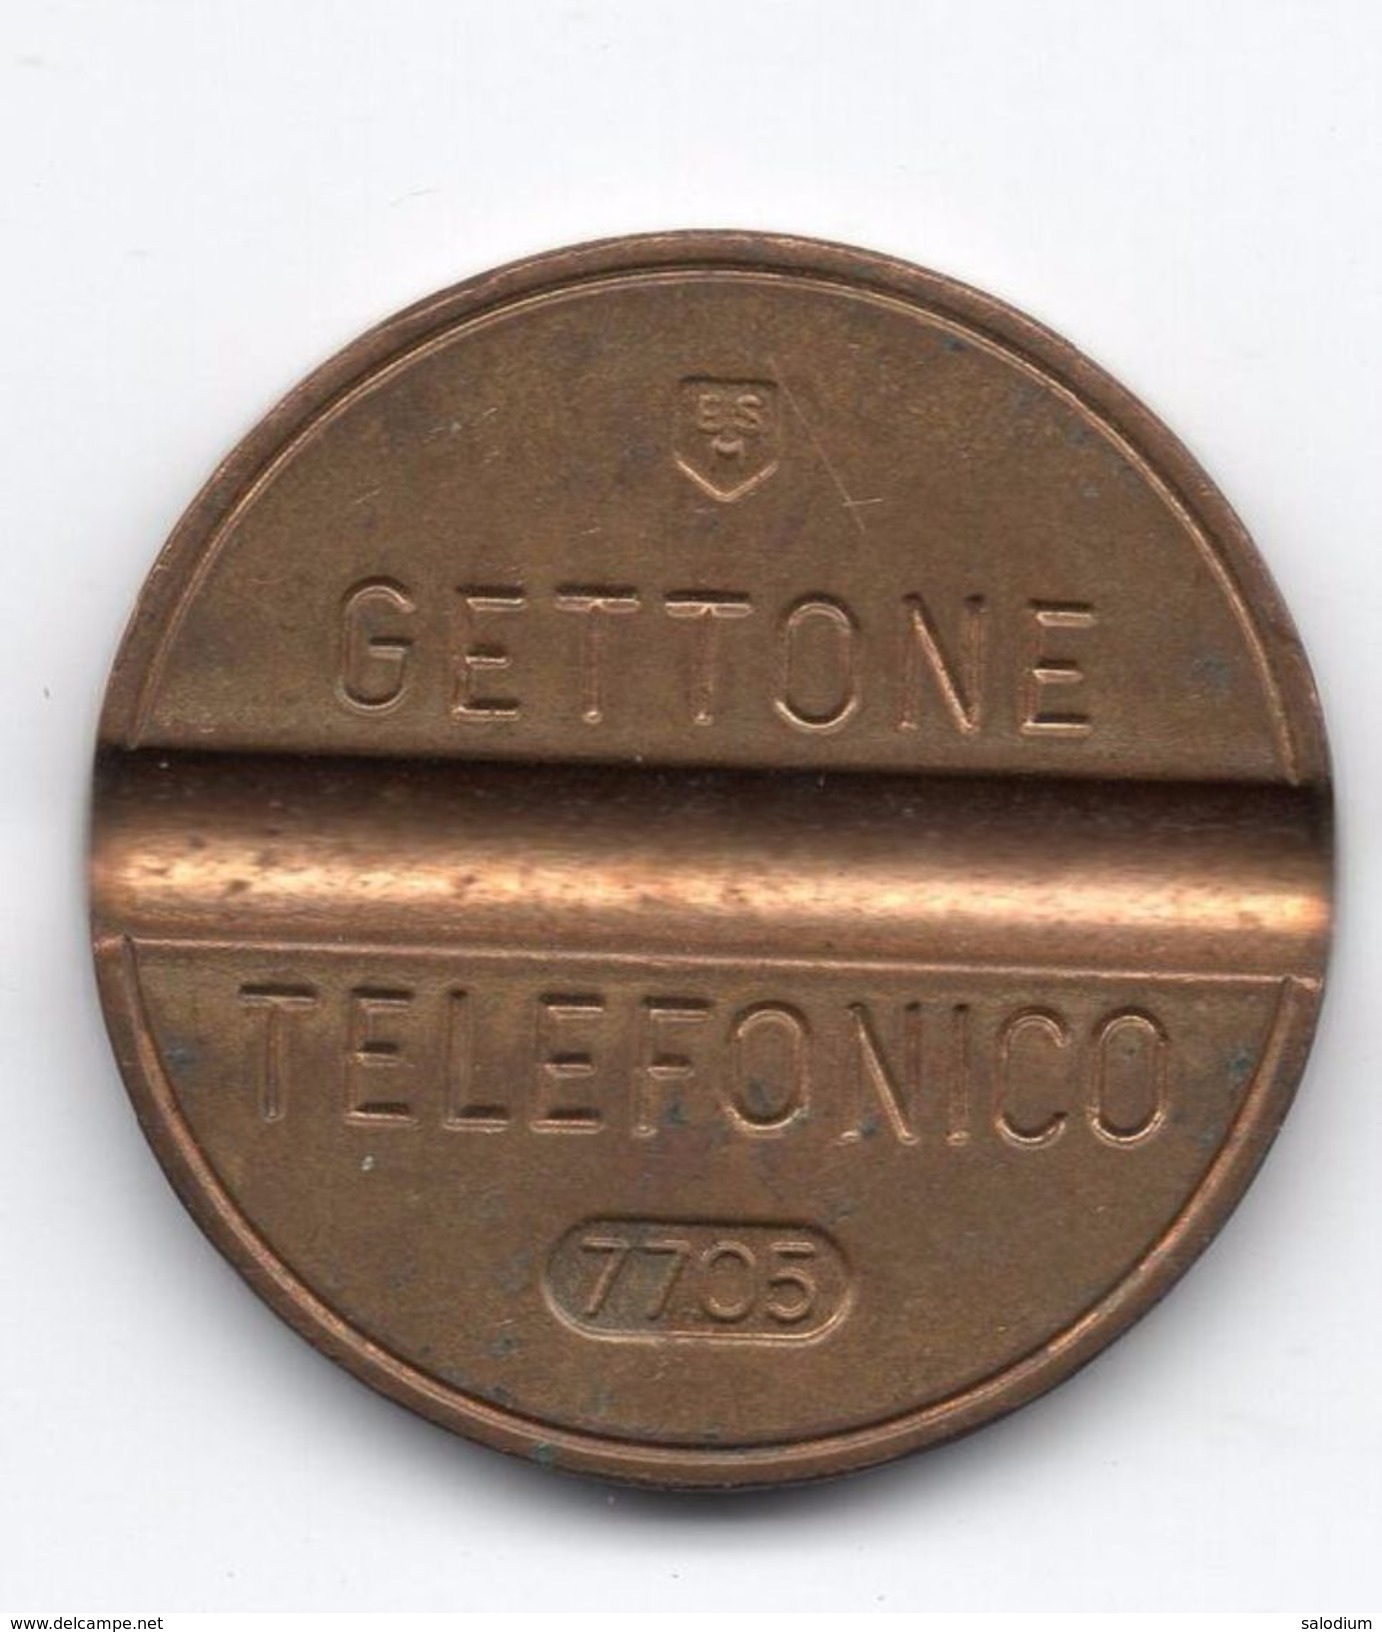 Gettone Telefonico 7705 Token Telephone - (Id-858) - Professionals/Firms